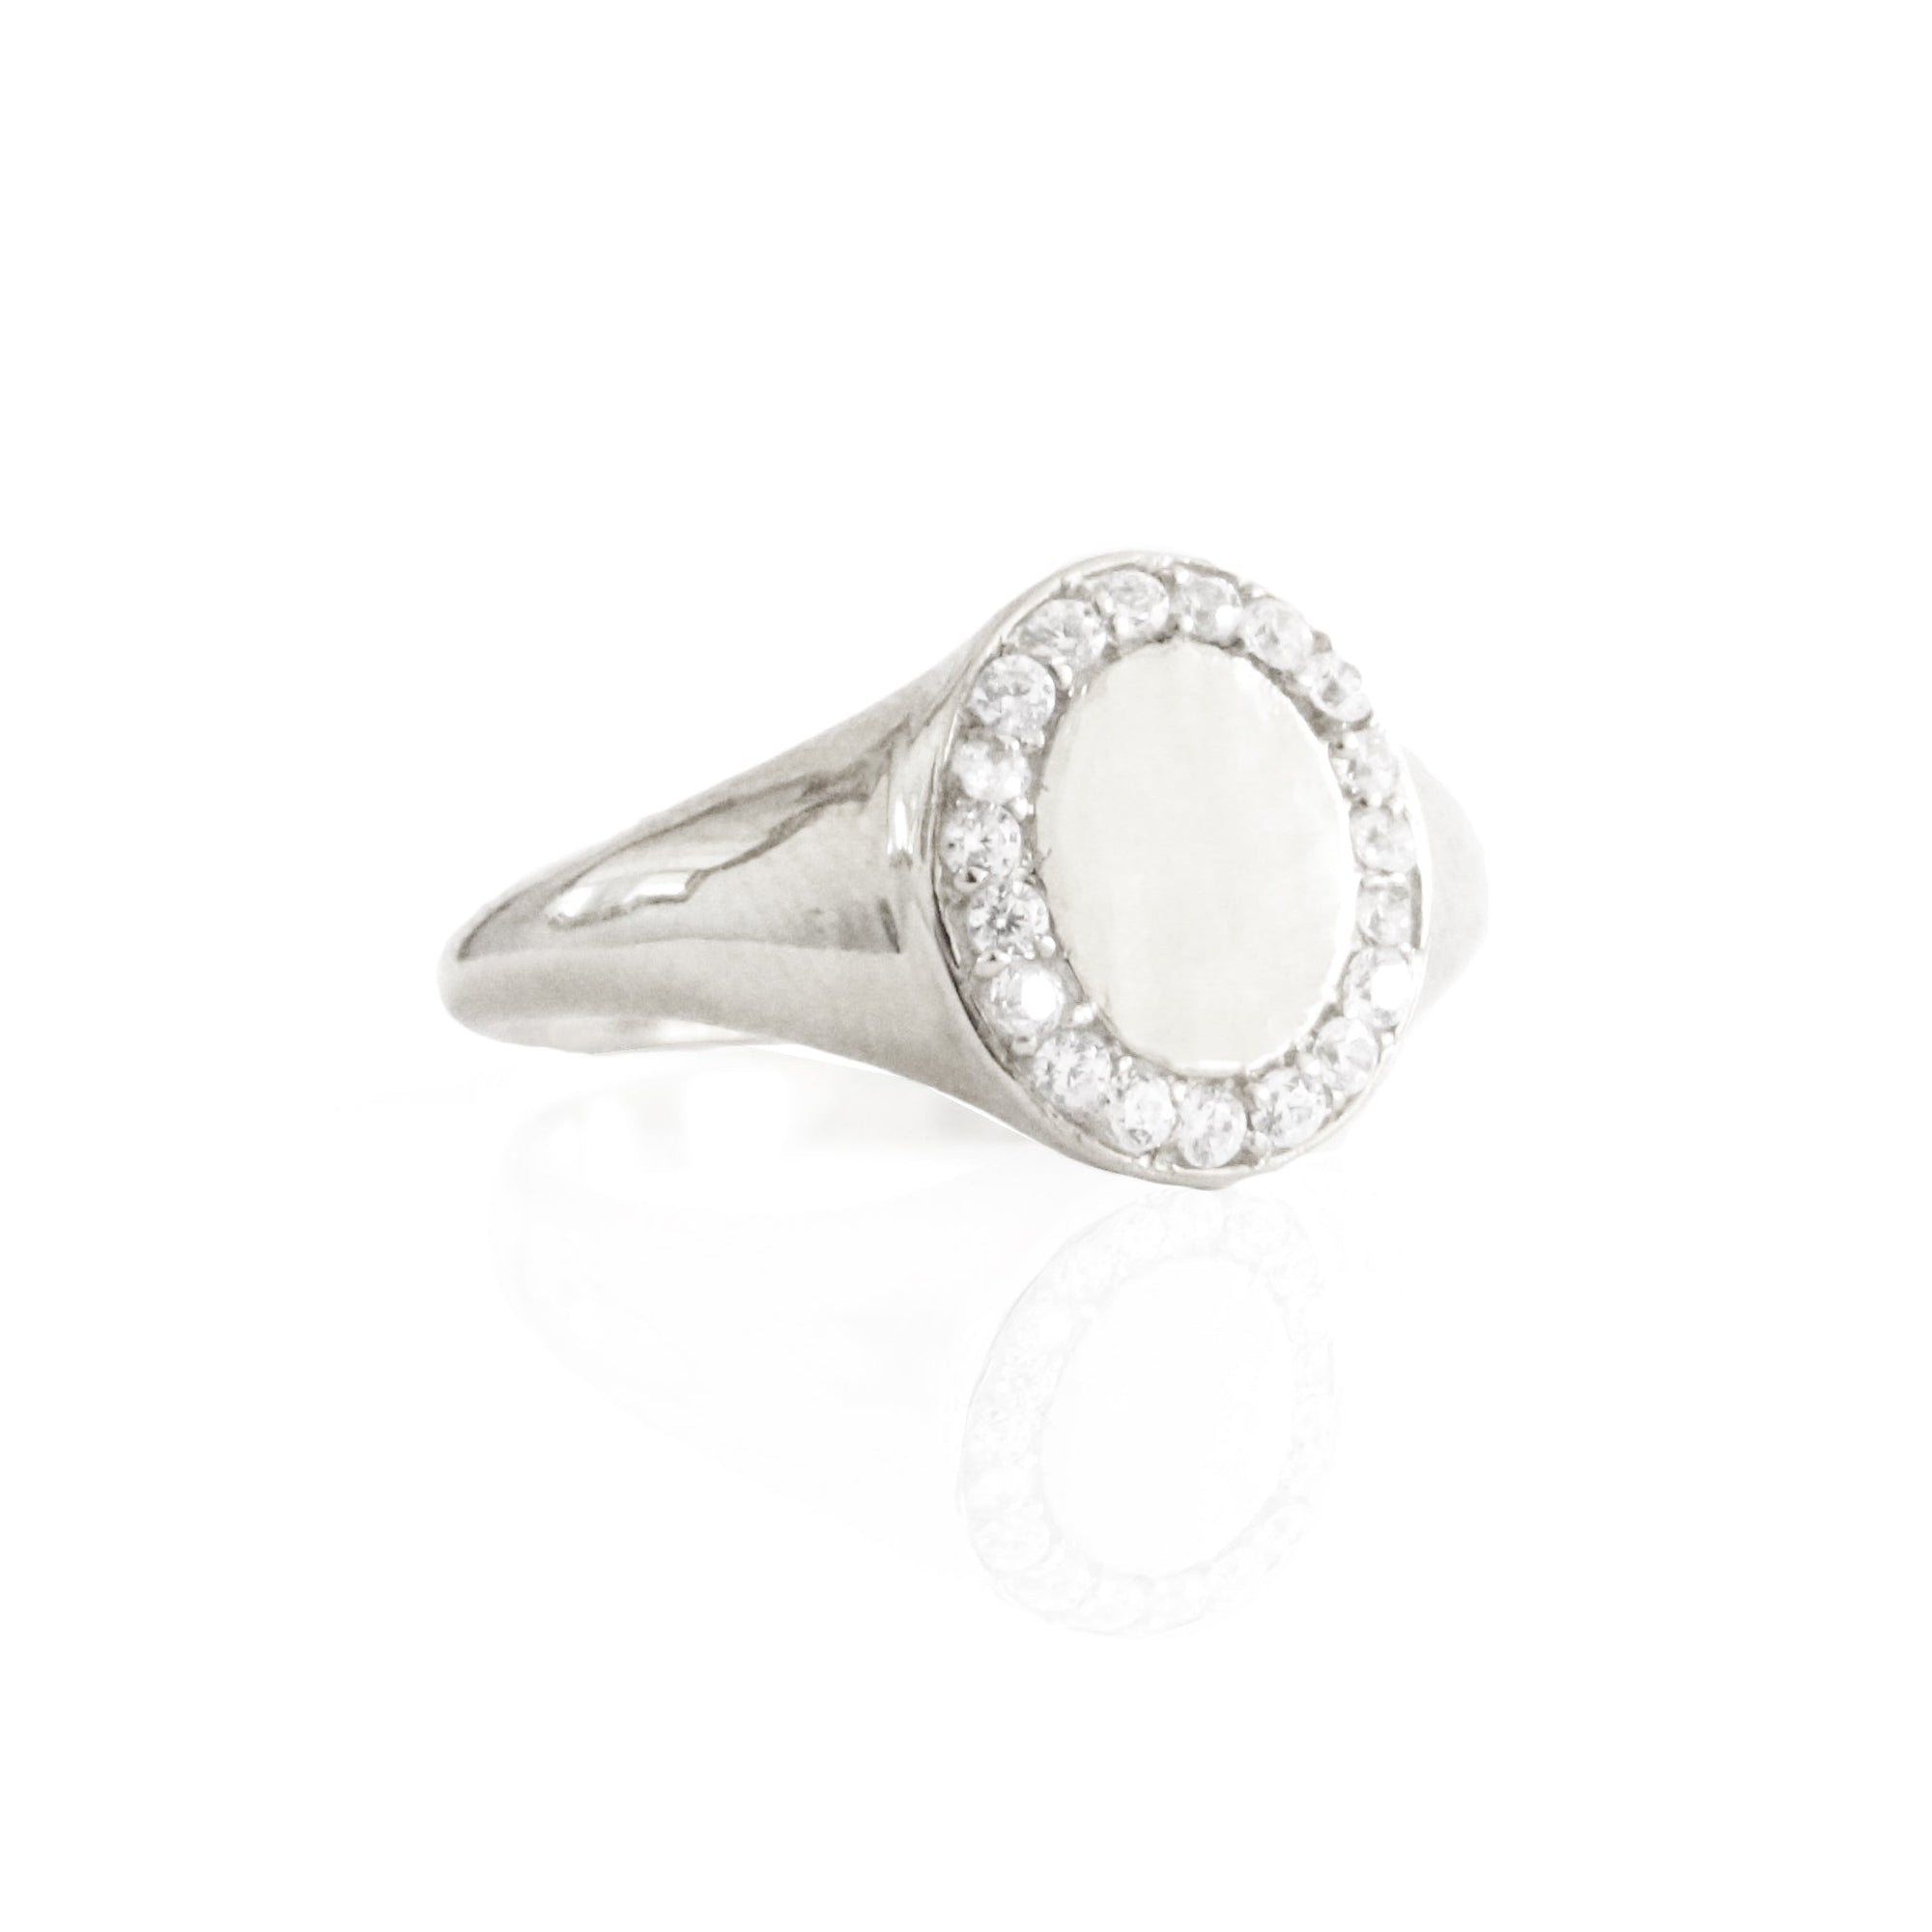 LOVE OVAL SIGNET RING - CUBIC ZIRCONIA & SILVER - SO PRETTY CARA COTTER